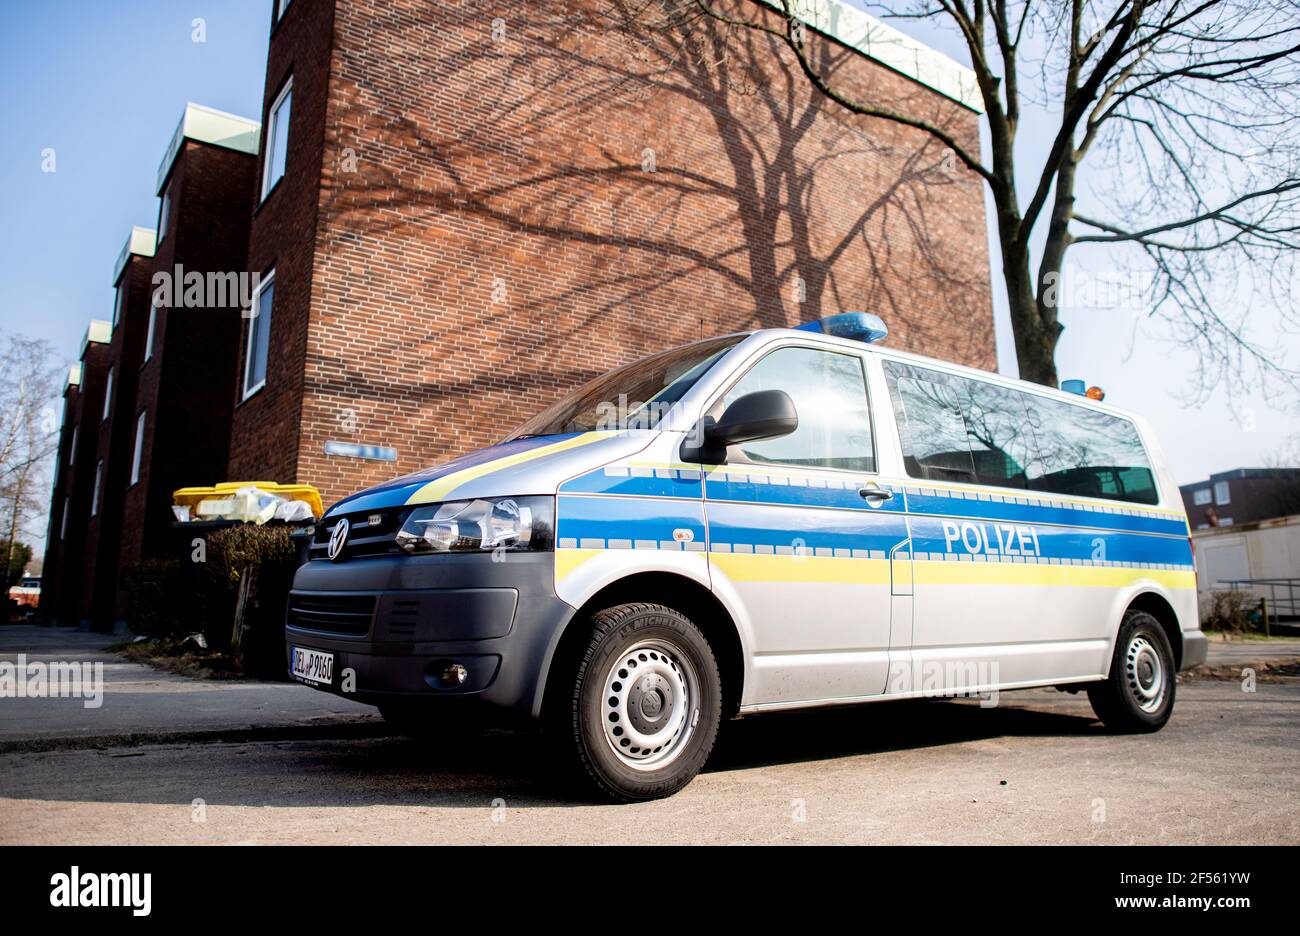 24 March 2021, Lower Saxony, Delmenhorst: A police emergency vehicle is parked in front of an apartment building. A woman has died in a homicide. The 28-year-old victim was fatally injured with a knife, a police spokeswoman said. Photo: Hauke-Christian Dittrich/dpa - ATTENTION: Street sign has been pixelated for legal reasons Stock Photo